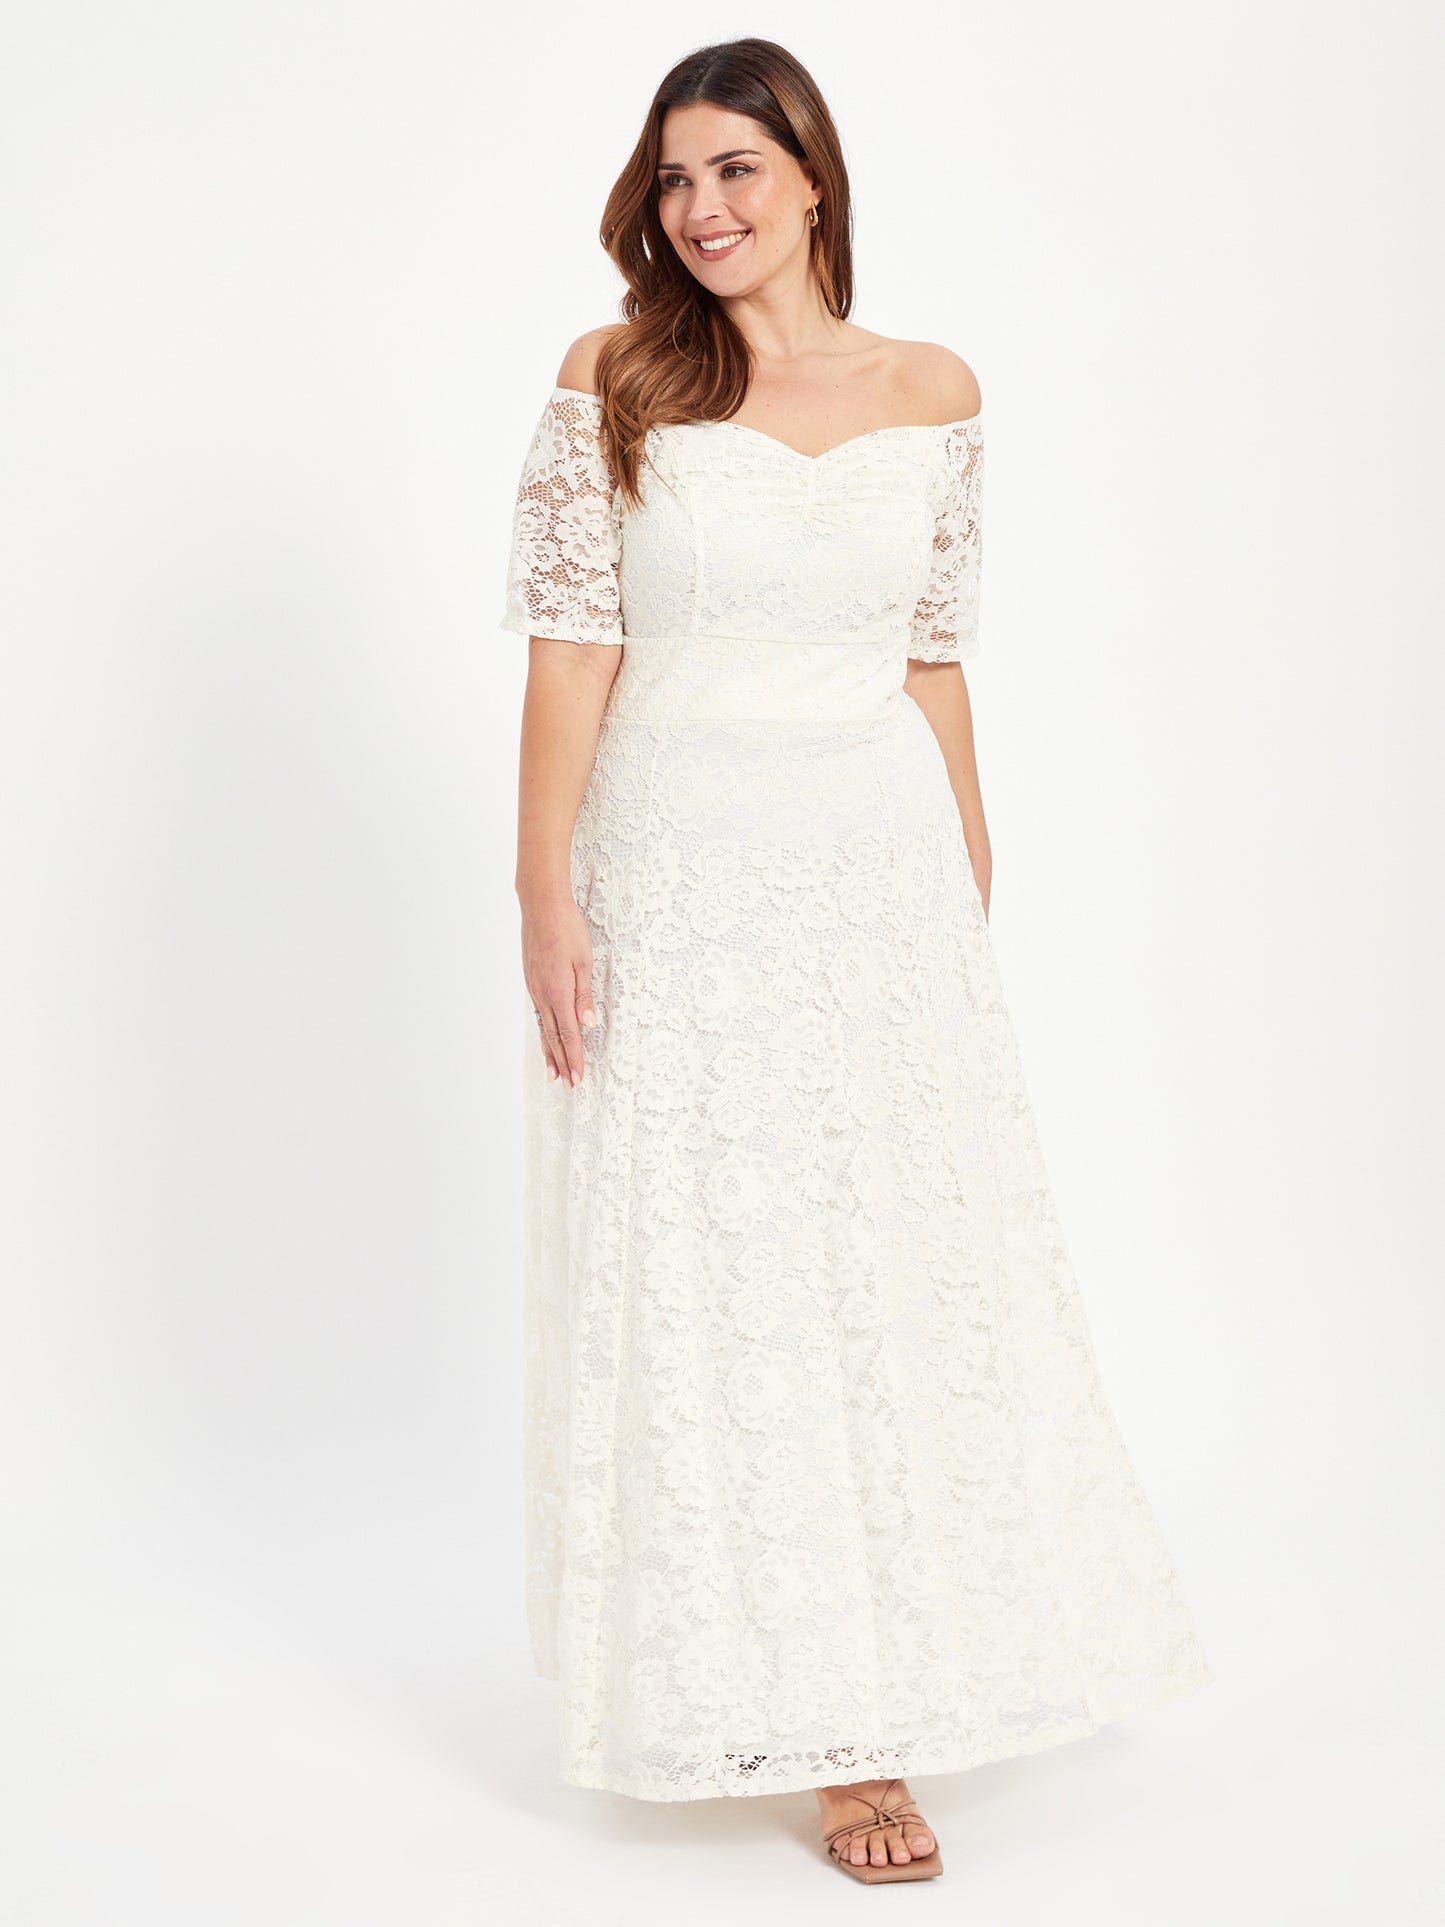 Samantha Cream Lace On or Off The Shoulder Sweetheart Maxi Dress